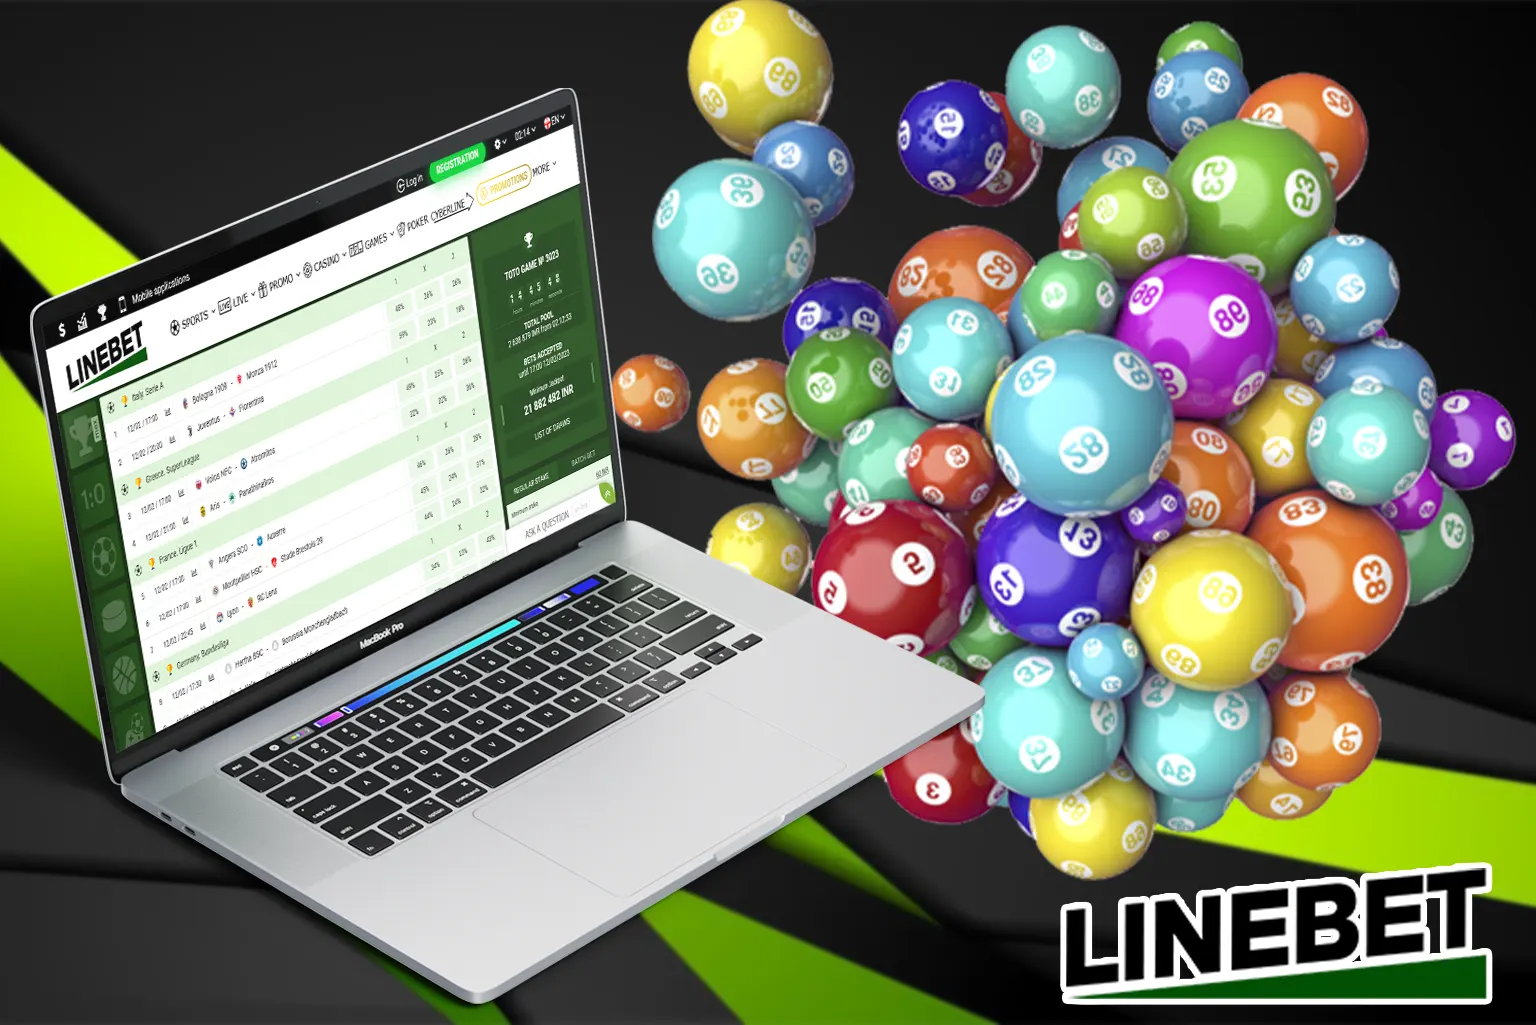 Try your luck, place a bet on the outcome at Linebet and win for correctly predicting the outcome of an event.